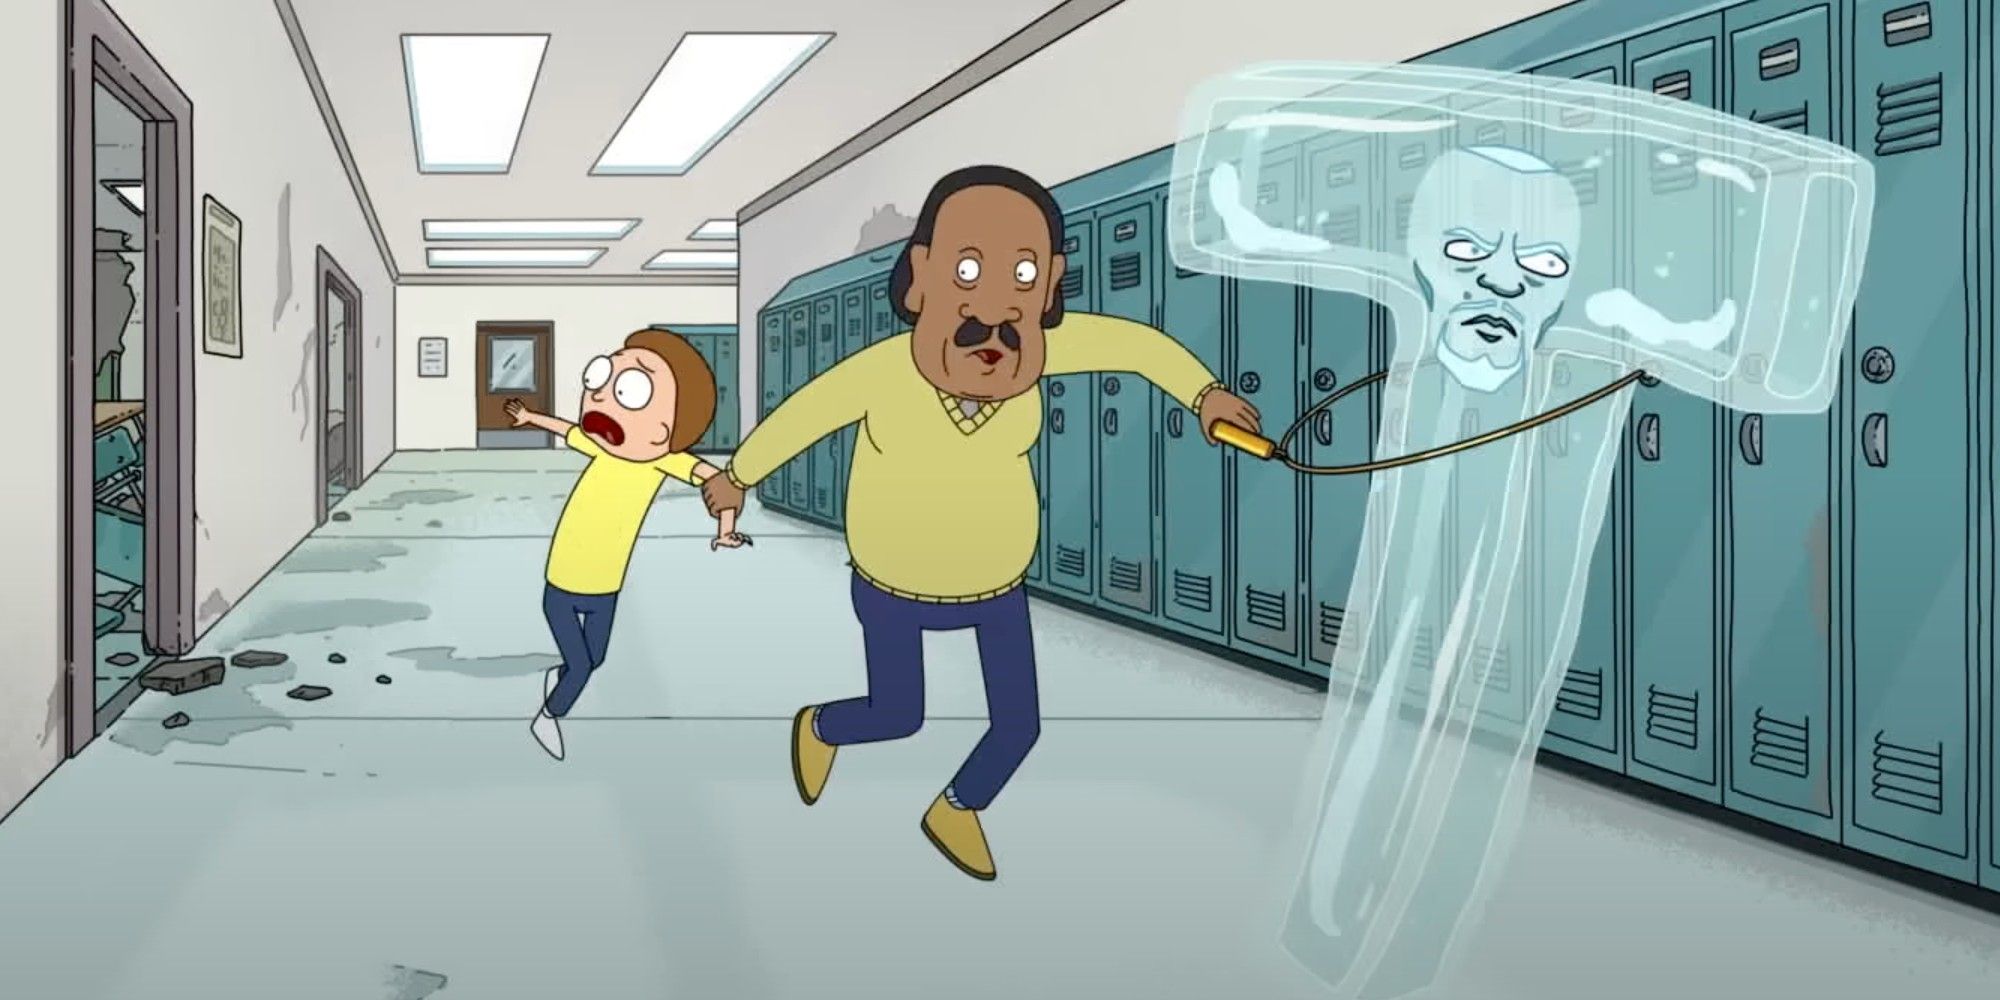 Morty, Mr. Goldenfold, and Water-T run away in the school hallway in Rick & Morty season 7 episode 8